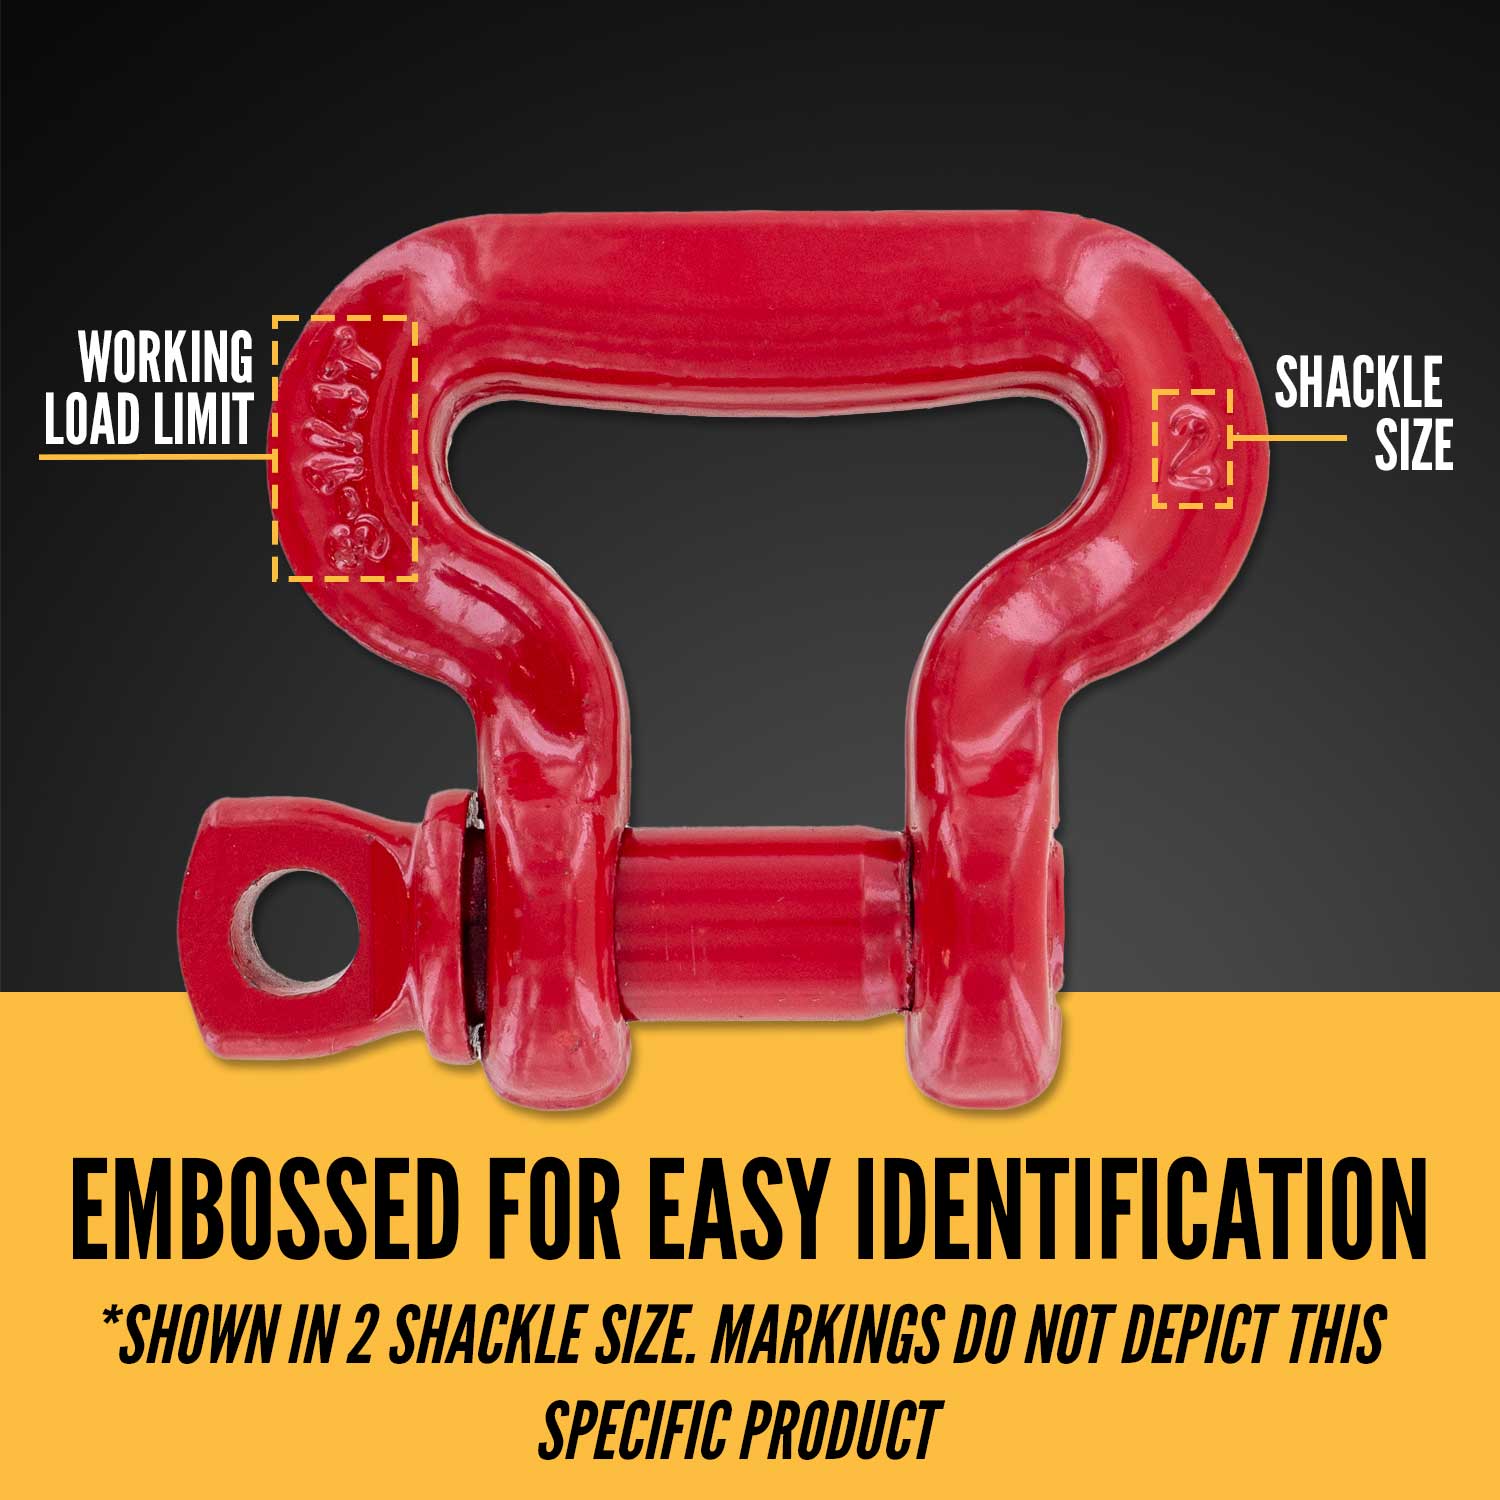 Crosby® Screw Pin Sling Saver Shackle | S-281 - 6.25 Ton embossed for easy identification